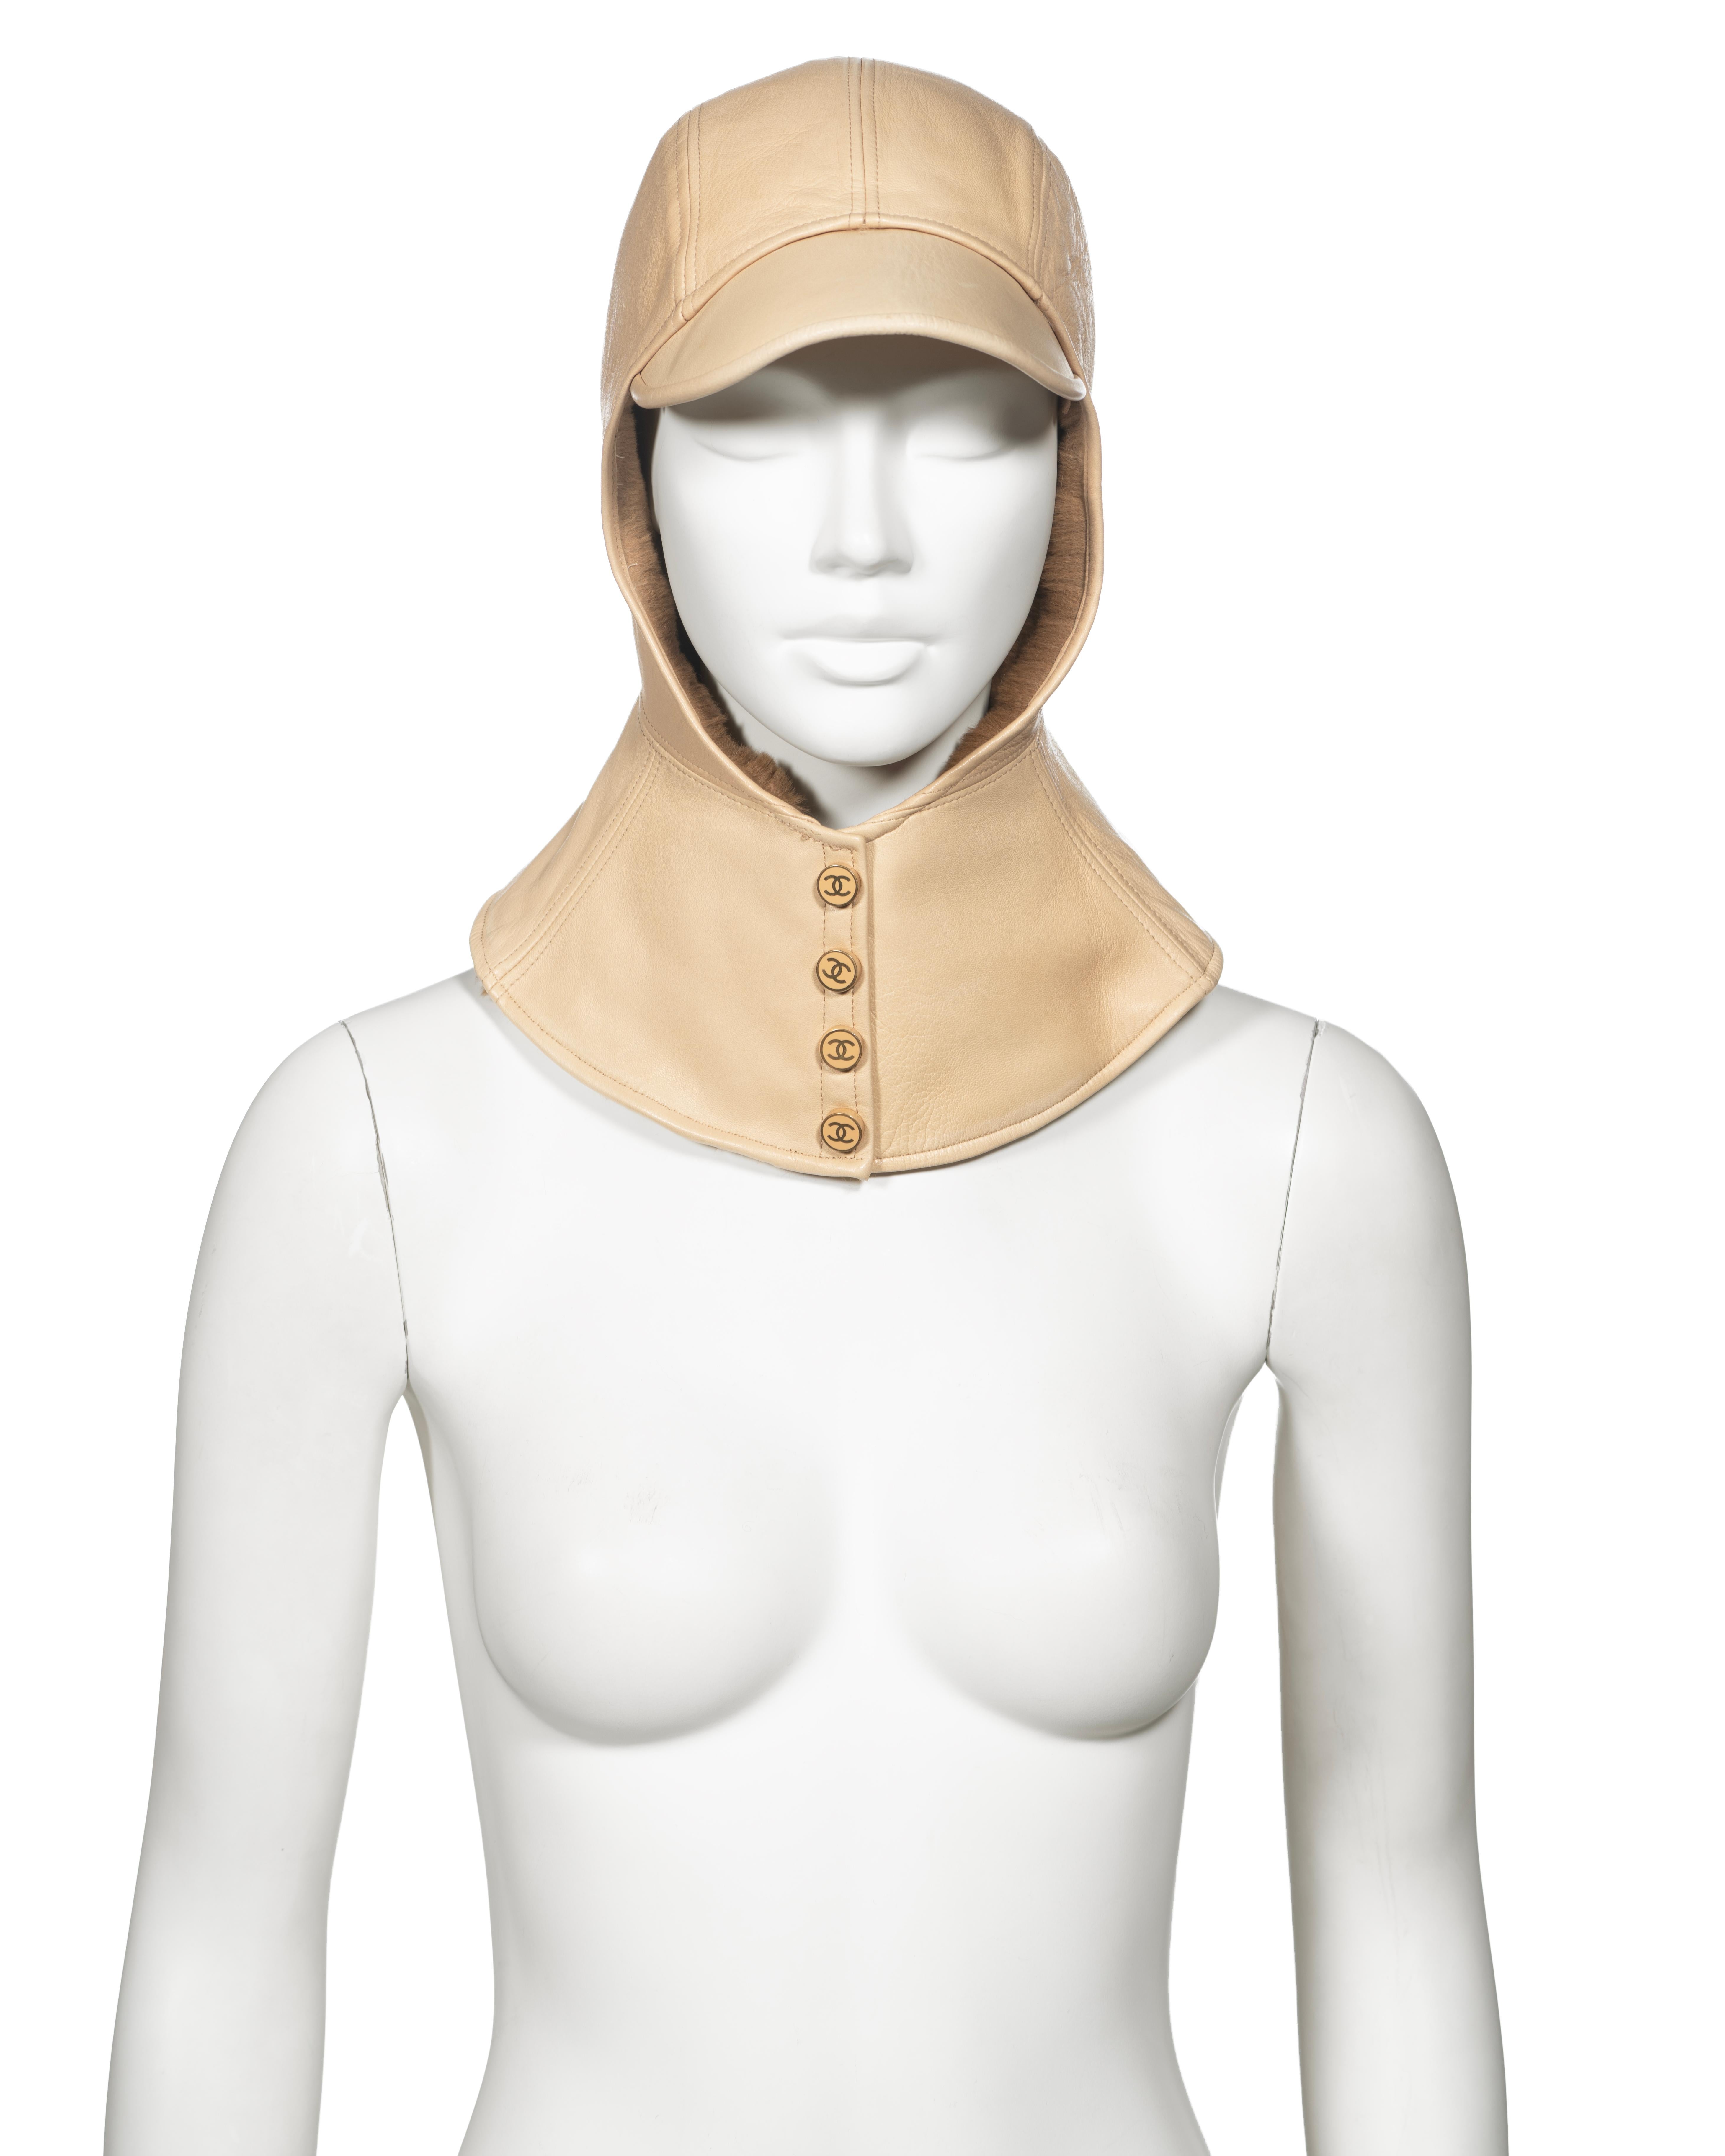 ▪ Archival Chanel Lambskin Leather Hat
▪ Creative Director: Karl Lagerfeld
▪ Fall-Winter 2001
▪ Crafted from luxurious cream lambskin leather
▪ Lined with sheared rabbit fur for added warmth and comfort
▪ Features a built-in neck flap that covers